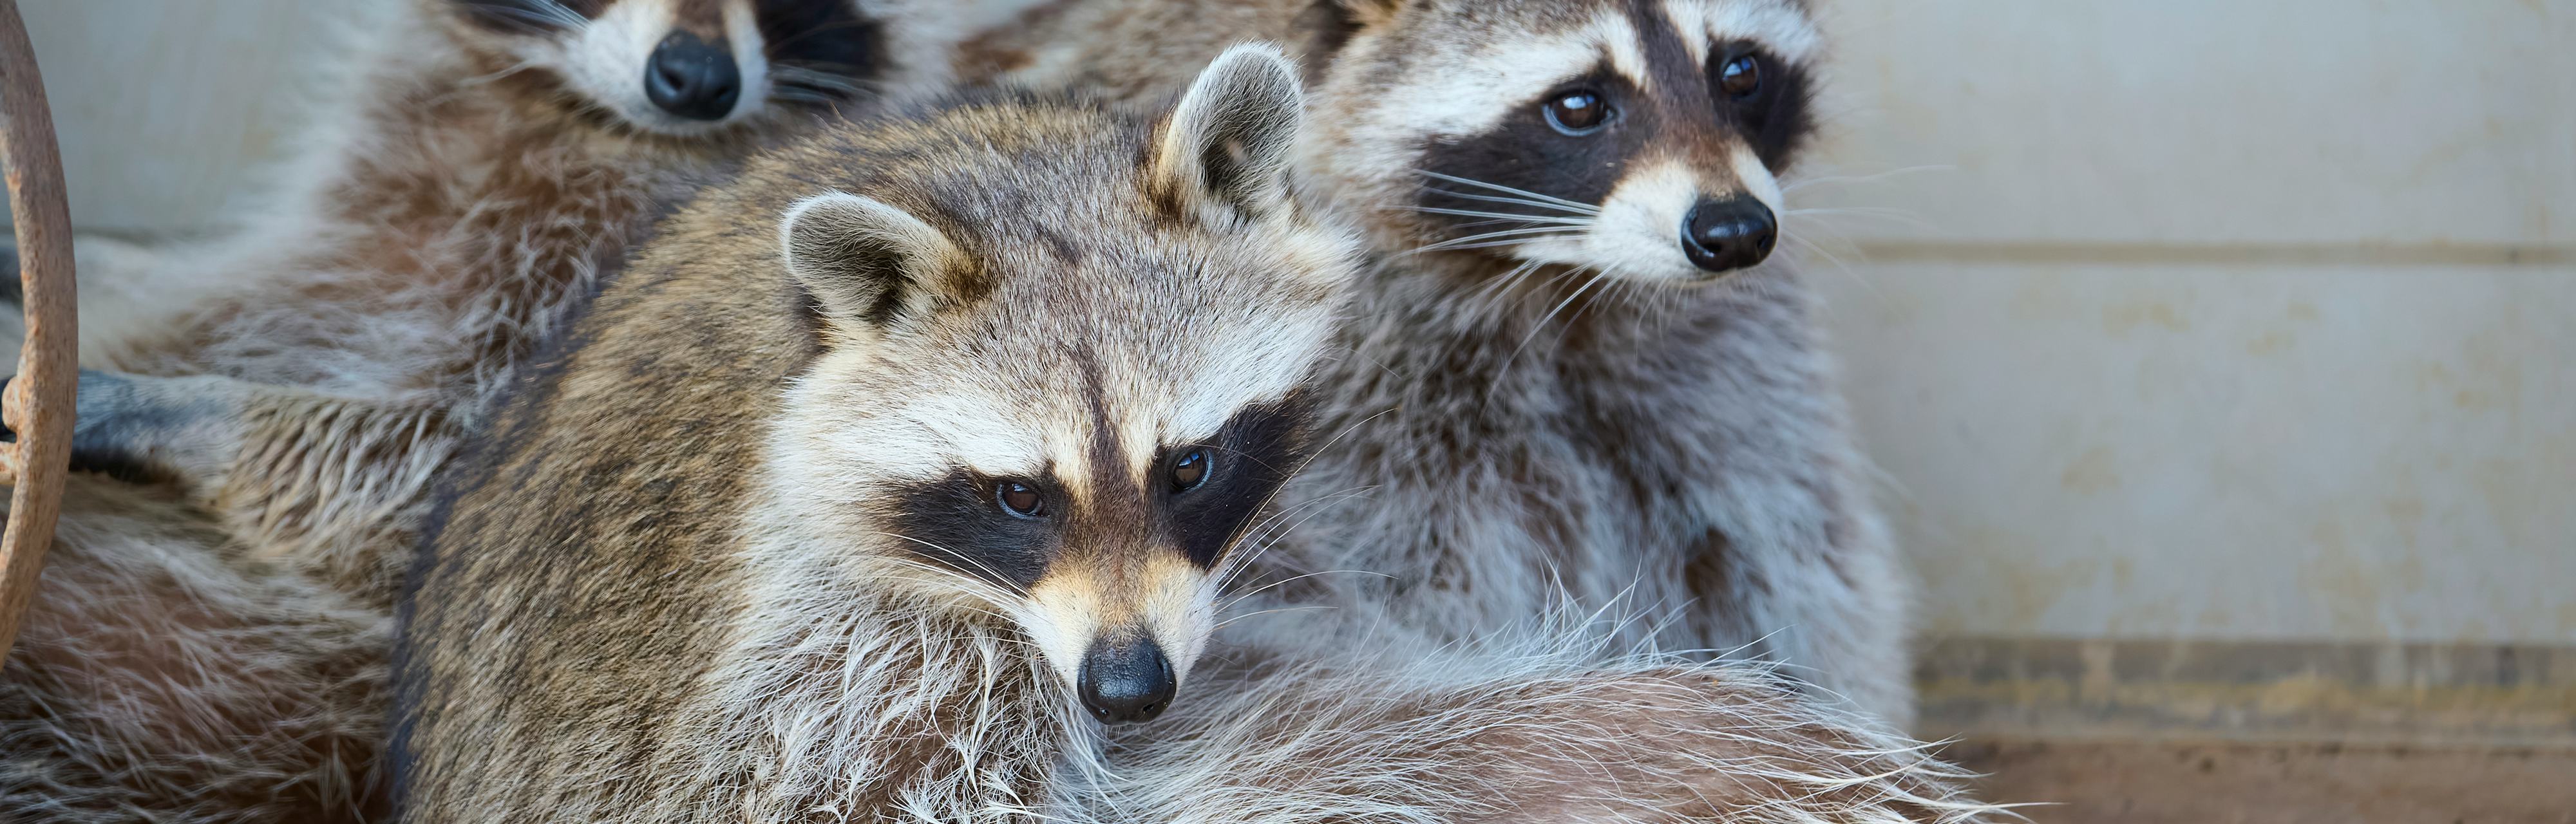 Just how smart are raccoons? They’re probably masterminds, study shows